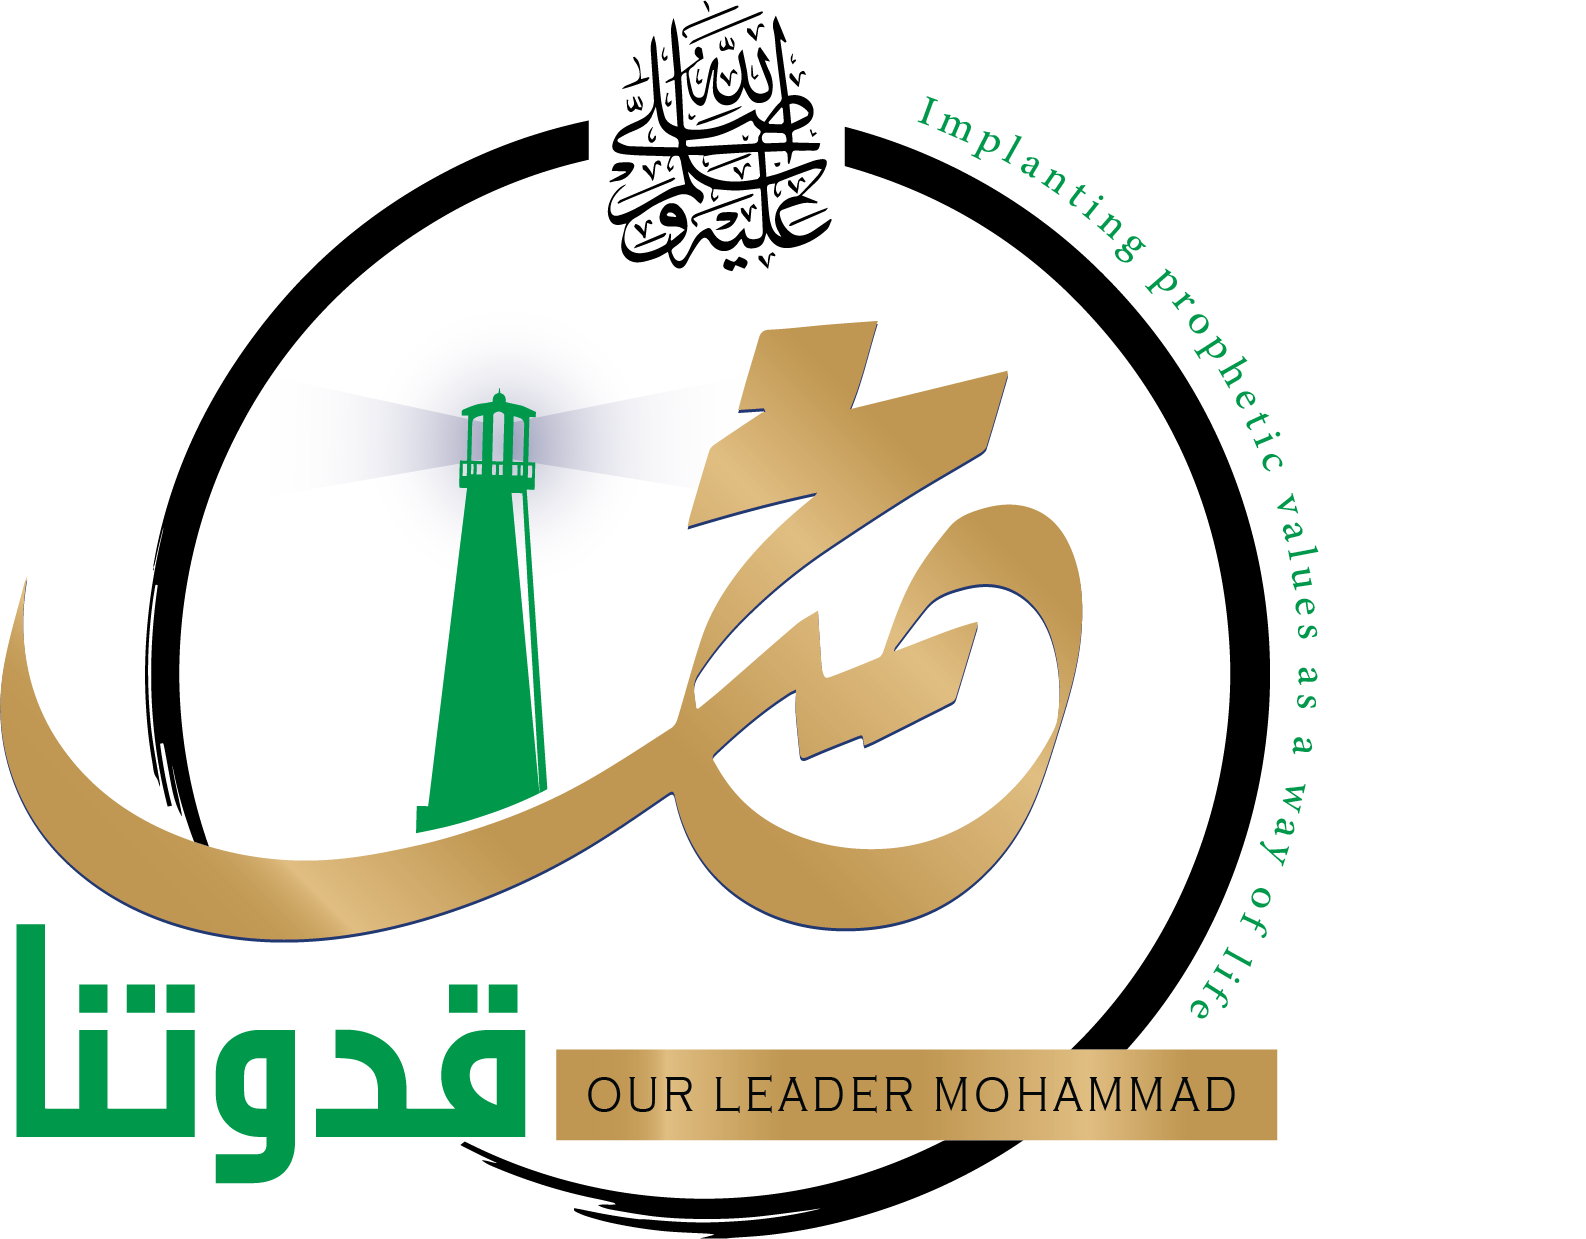 Our Leader Mohammad logo